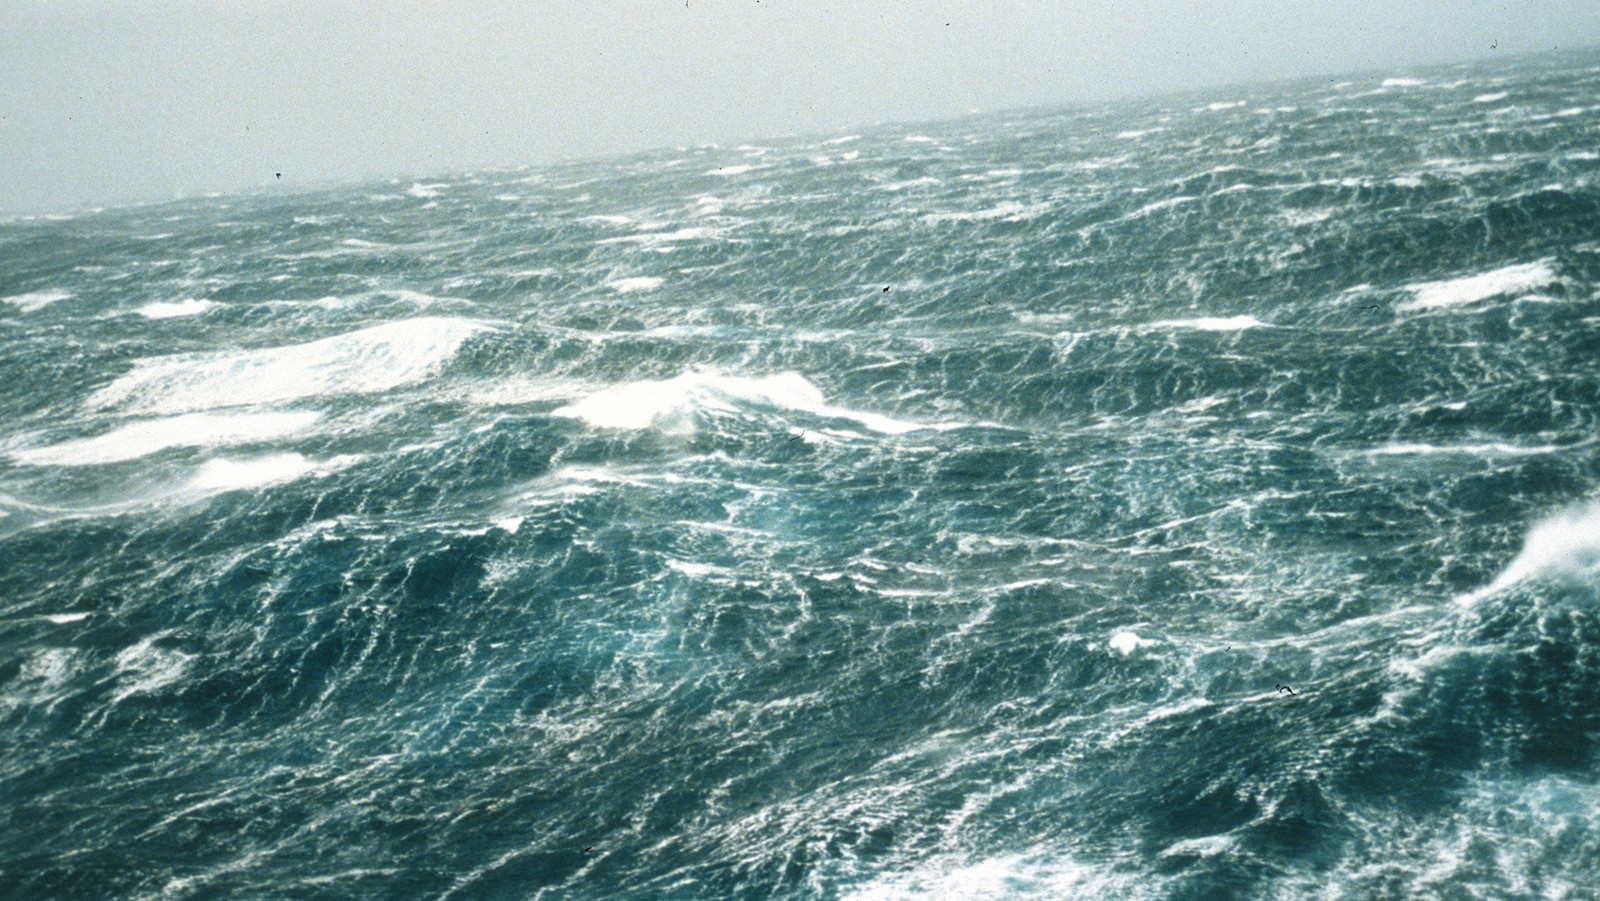 North Pacific storm waves as seen from the M/V NOBLE STAR. Photo credit: NWS